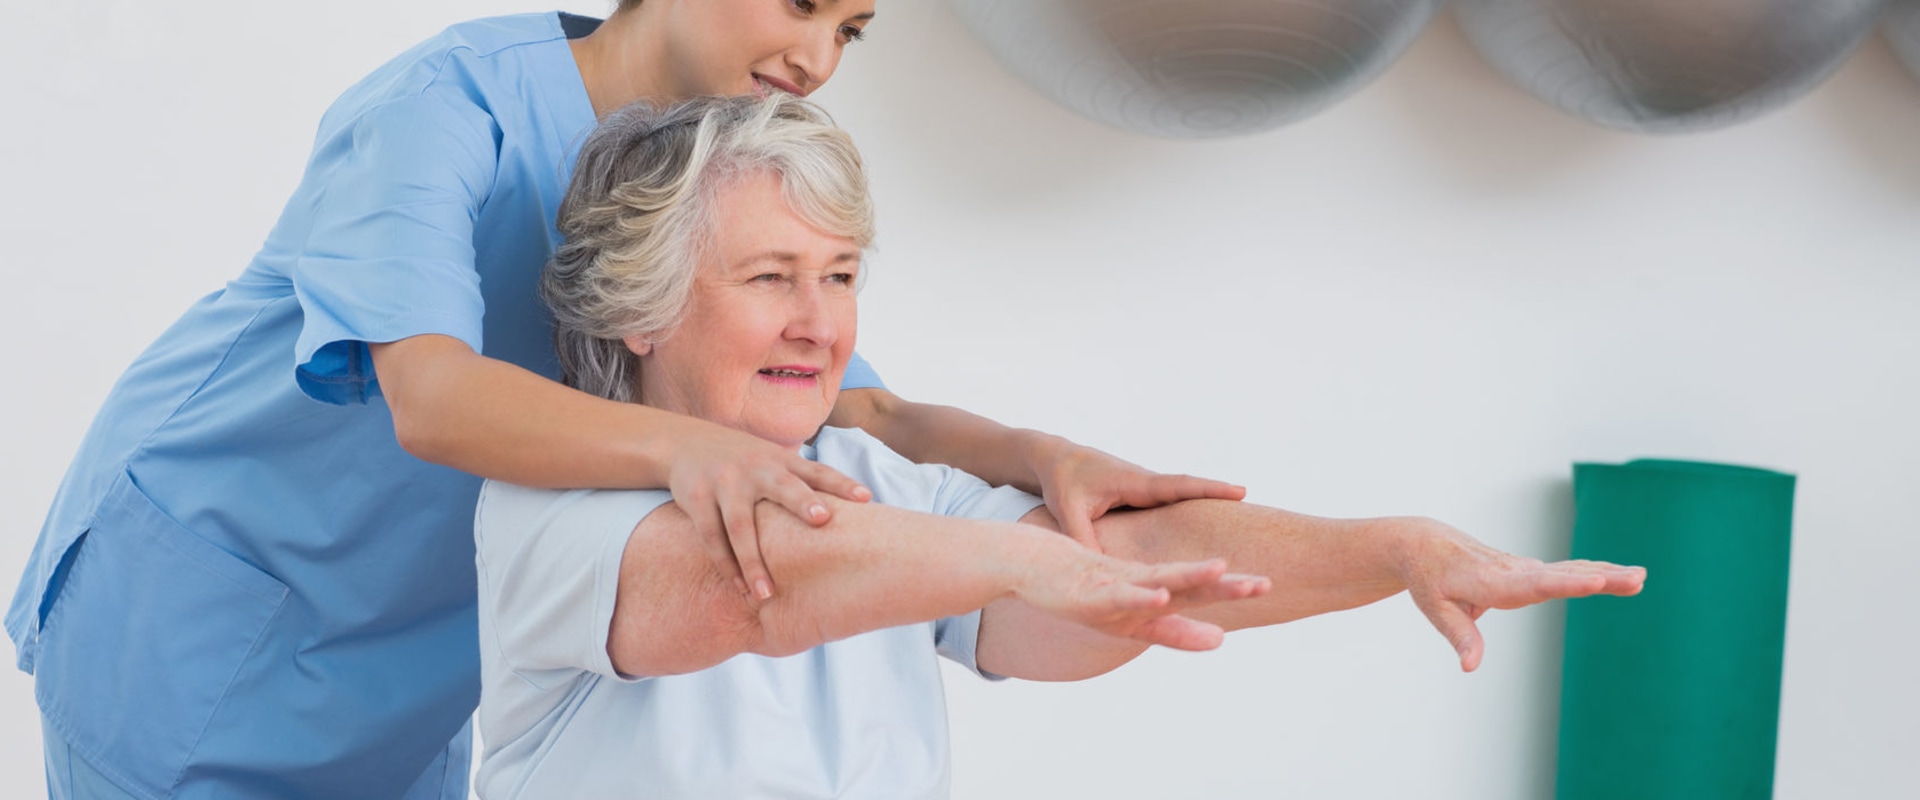 Is Physical Therapy Pain Normal?